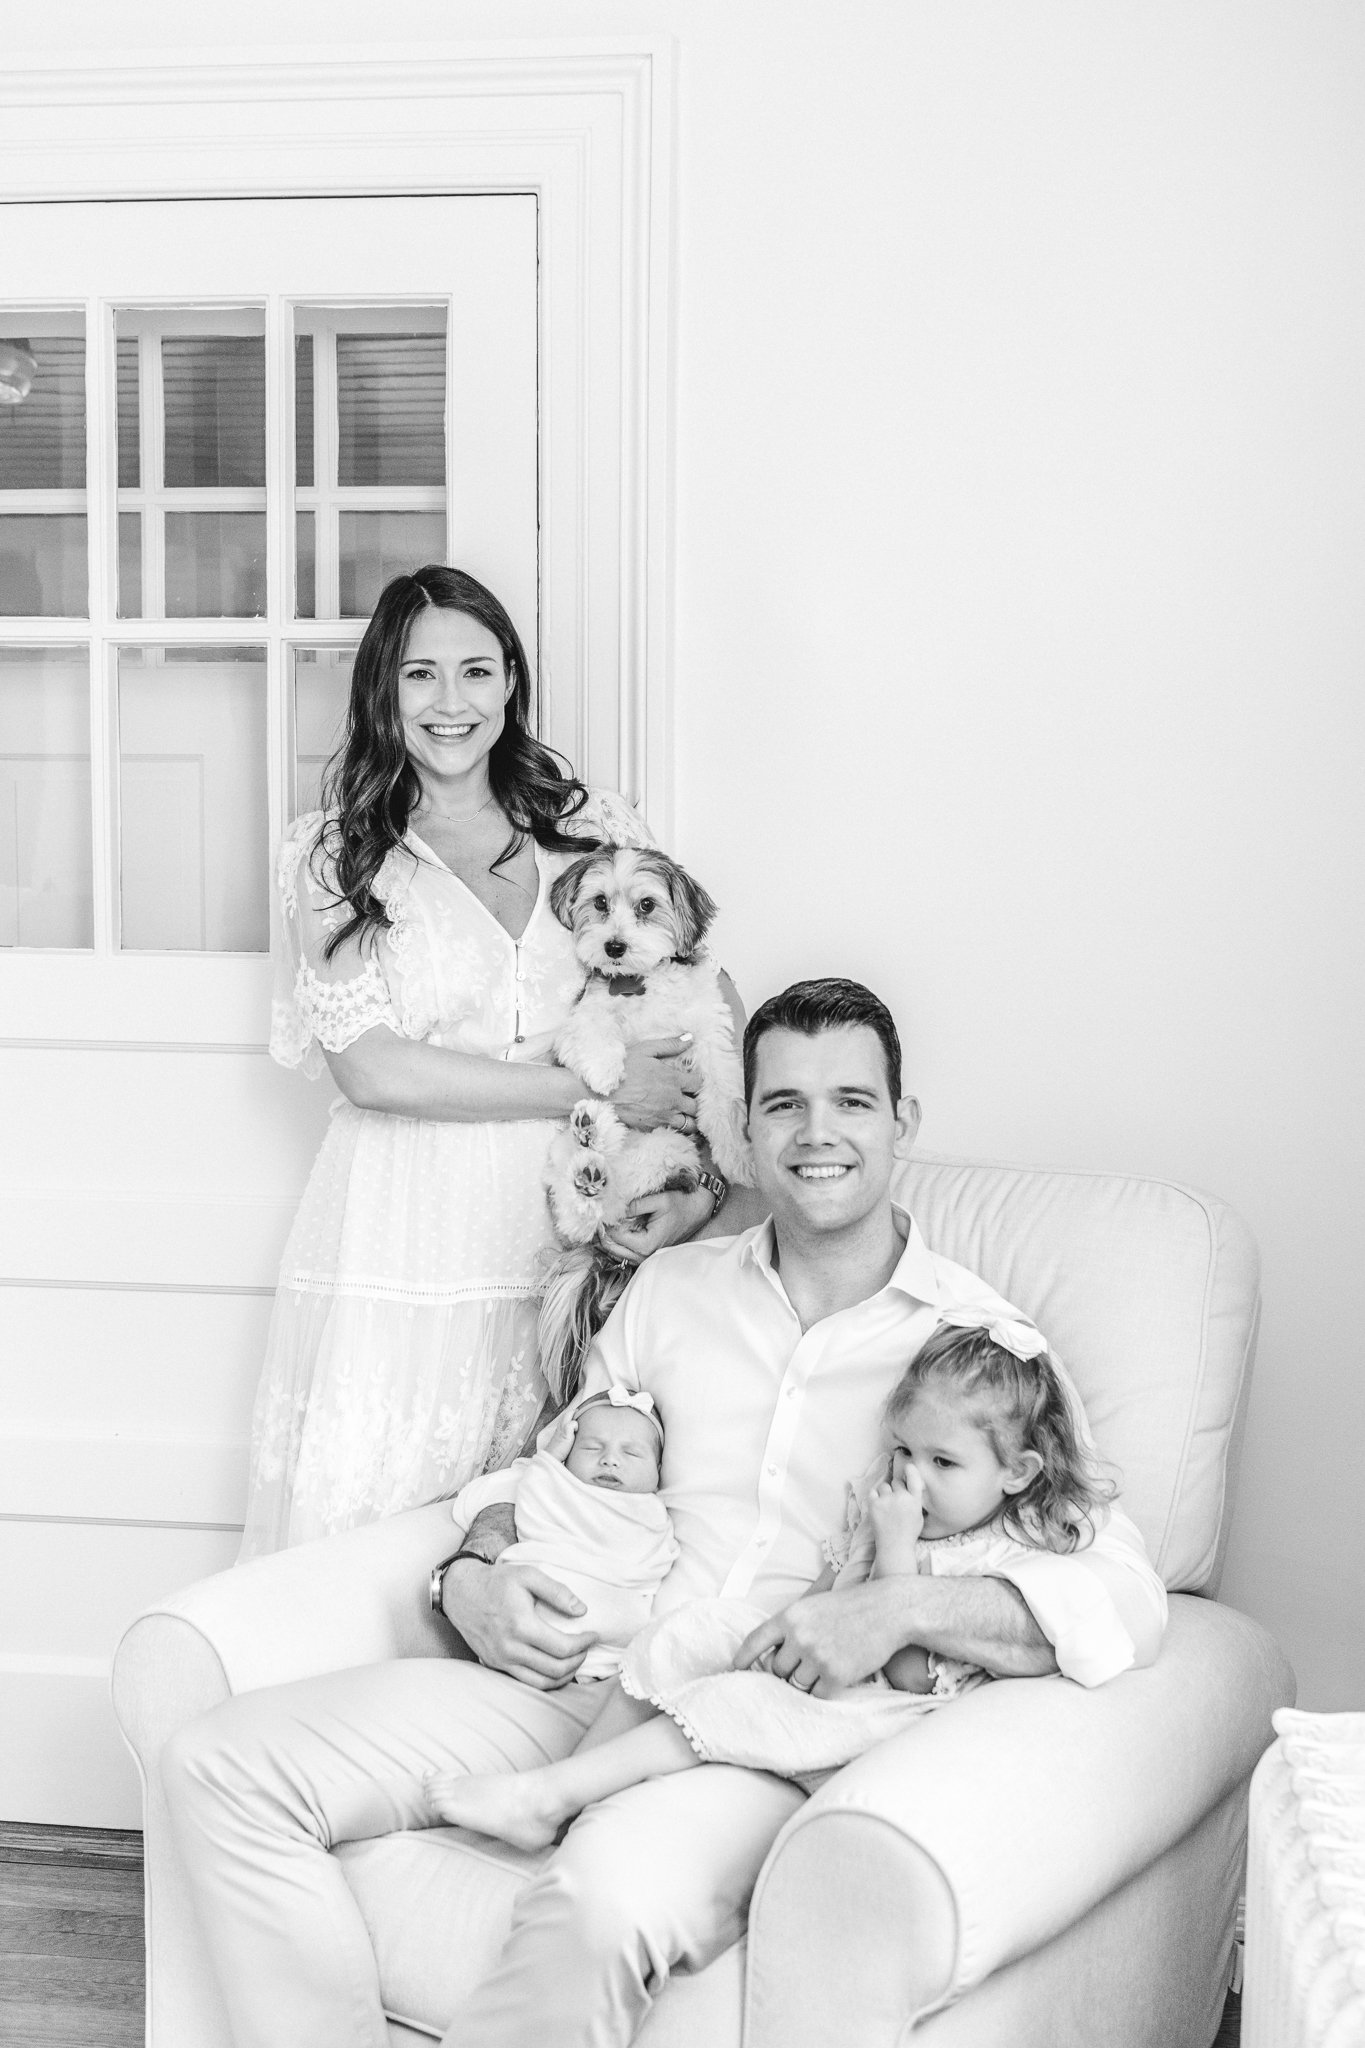  A family portrait with two little girls a dog and a mother and father by Nicole Hawkins Photography. newborn family portrait MA newborn MA photography #NicoleHawkinsPhotography #NicoleHawkinsNewborns #Babygirl #Newbornfamilyportraits #ChathamNewborn